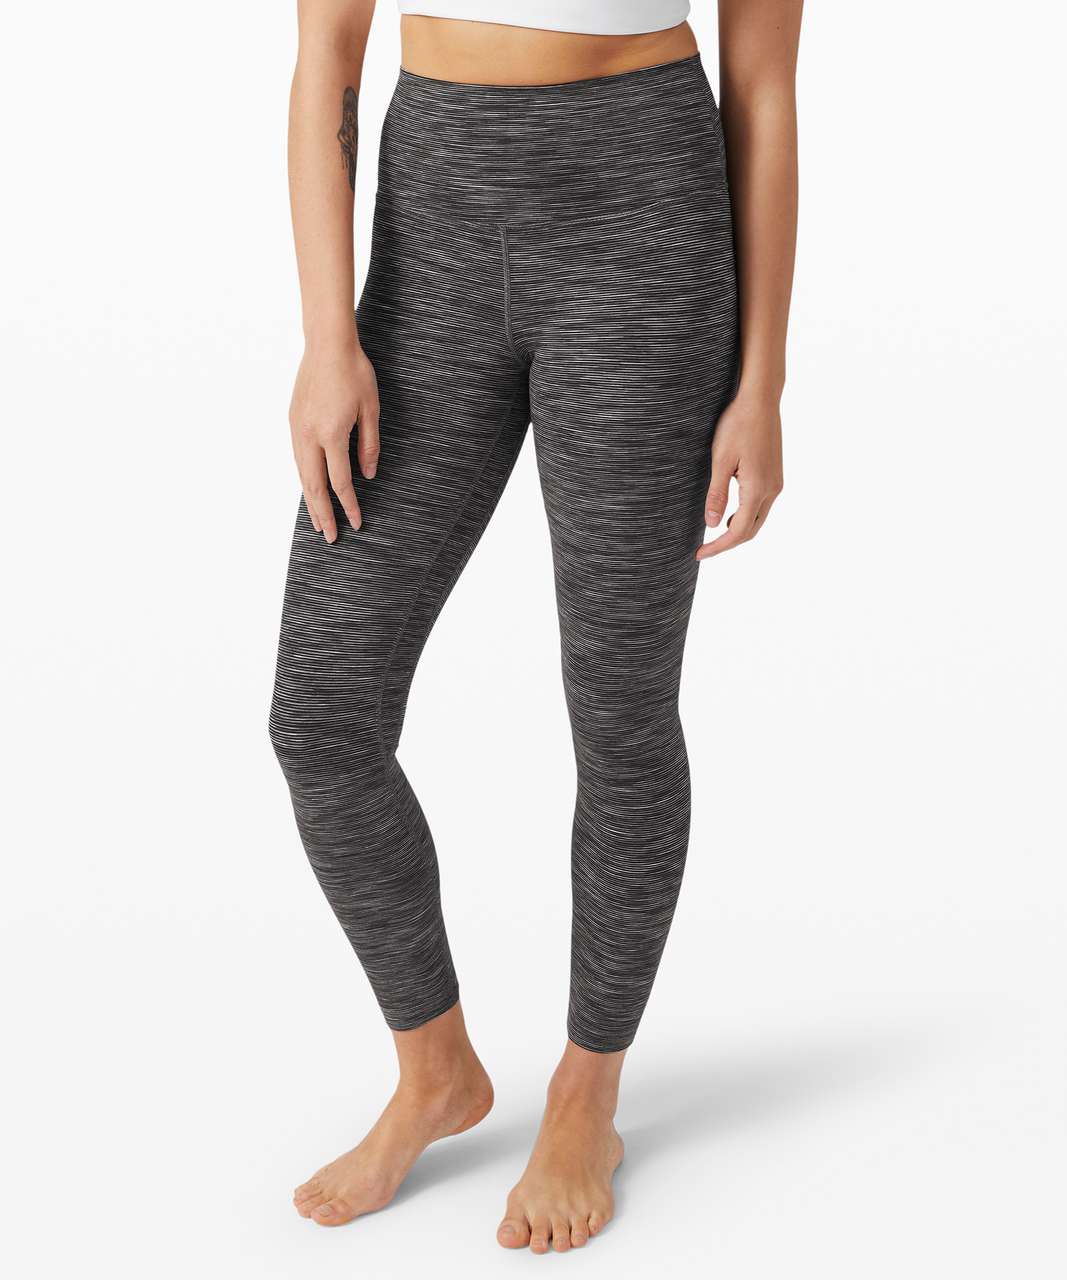 LULULEMON Women's Jet Pant 27 Inseam Wee Are From Space Dark Carbon Gray  Size 6